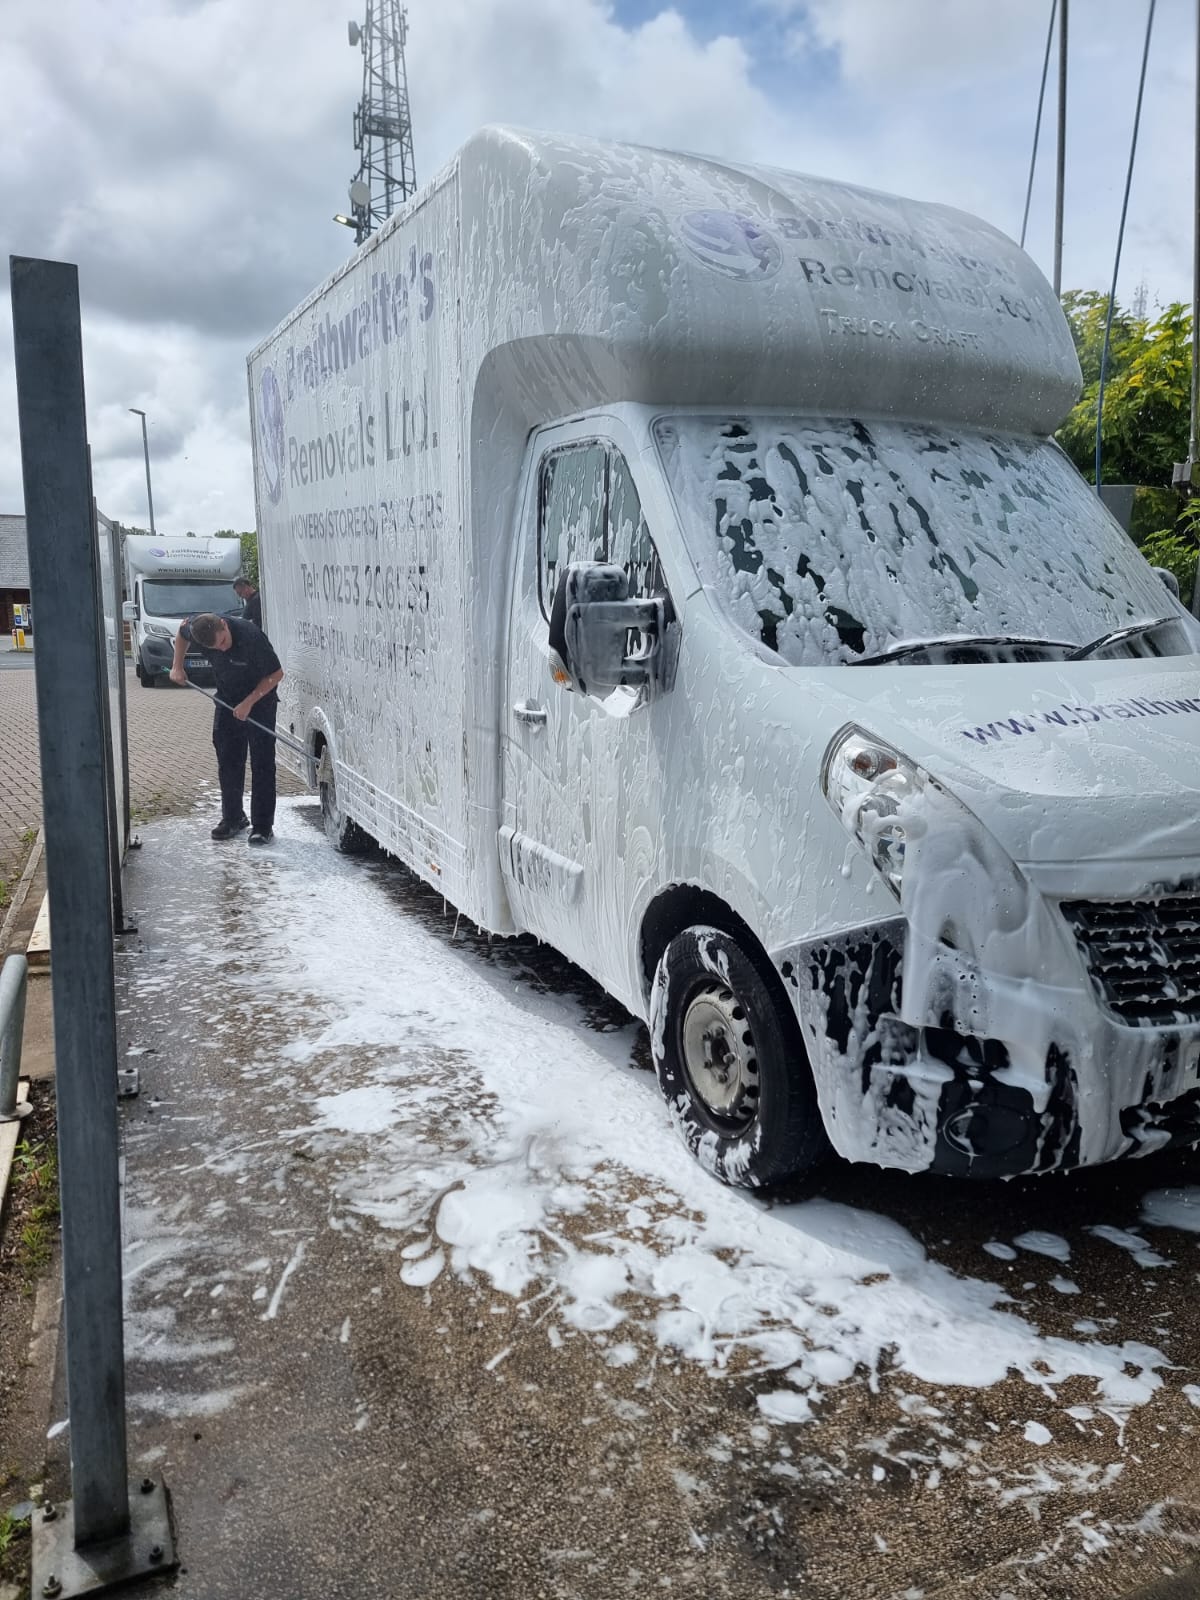 Keeping our Removal Vans Clean